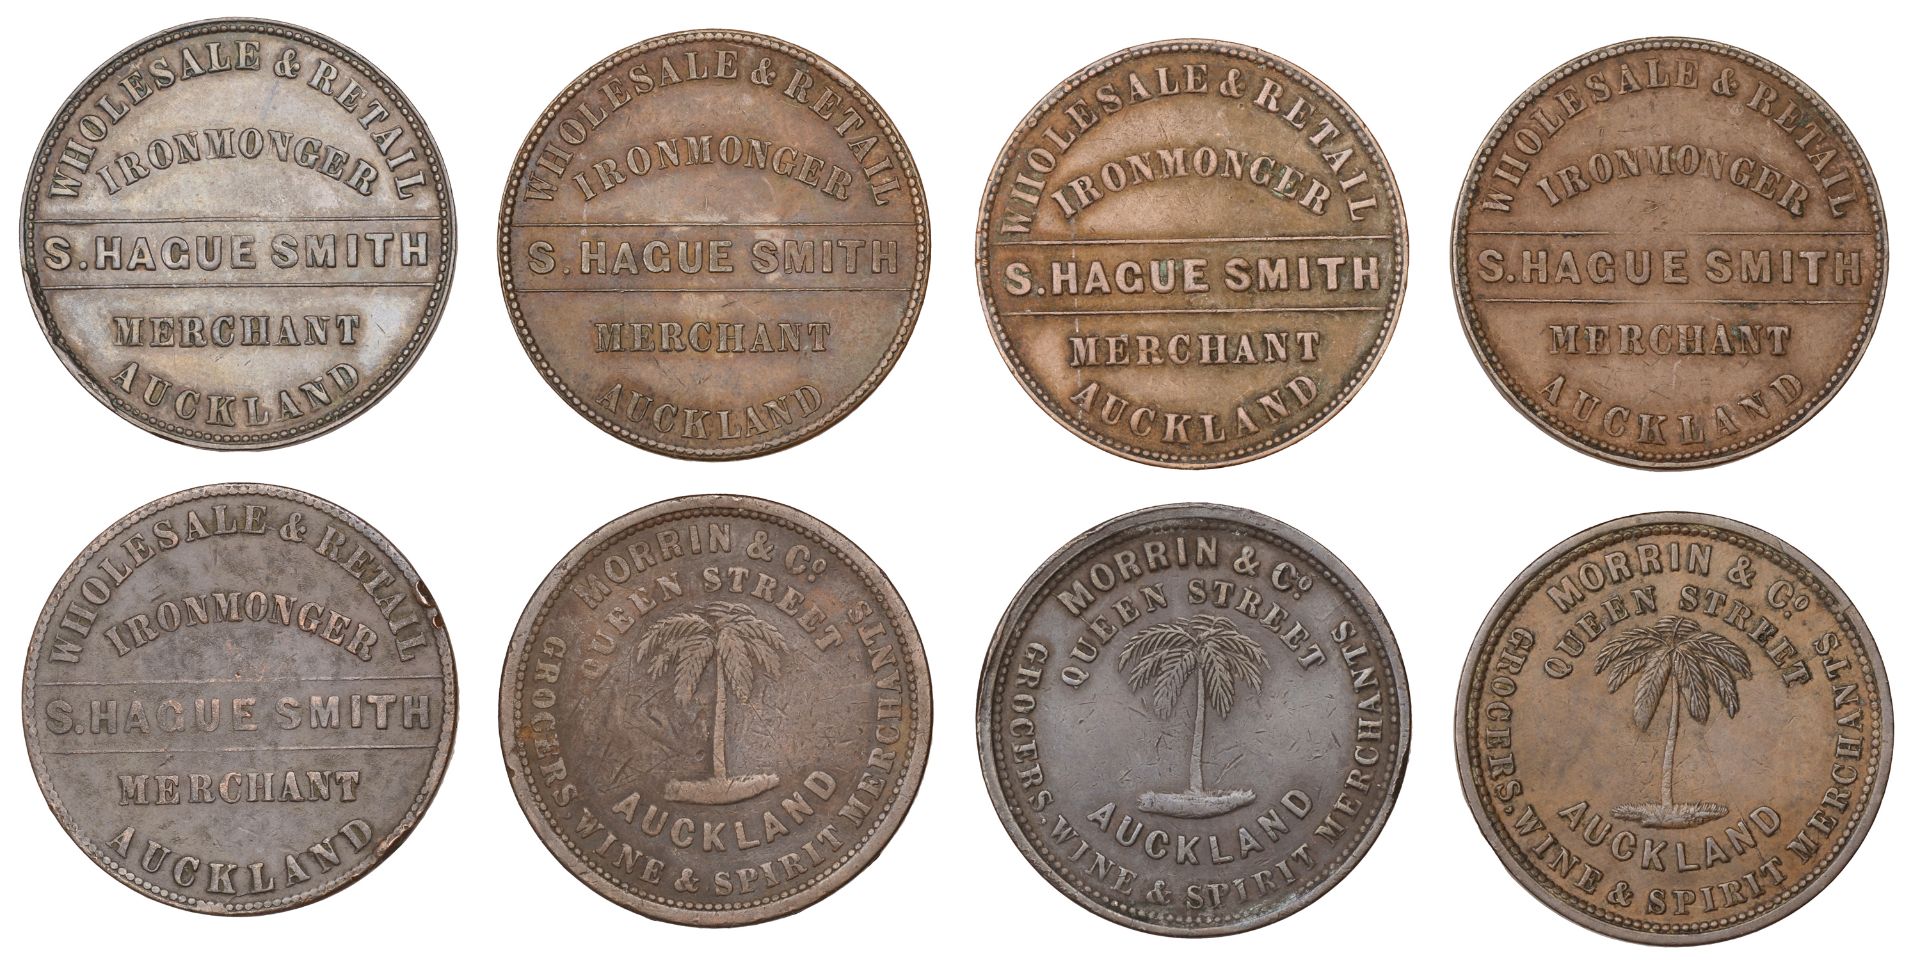 New Zealand, AUCKLAND, Morrin & Co., Pennies (3), undated (G 203, 203a, 203b; A 387-389); S.... - Image 2 of 2